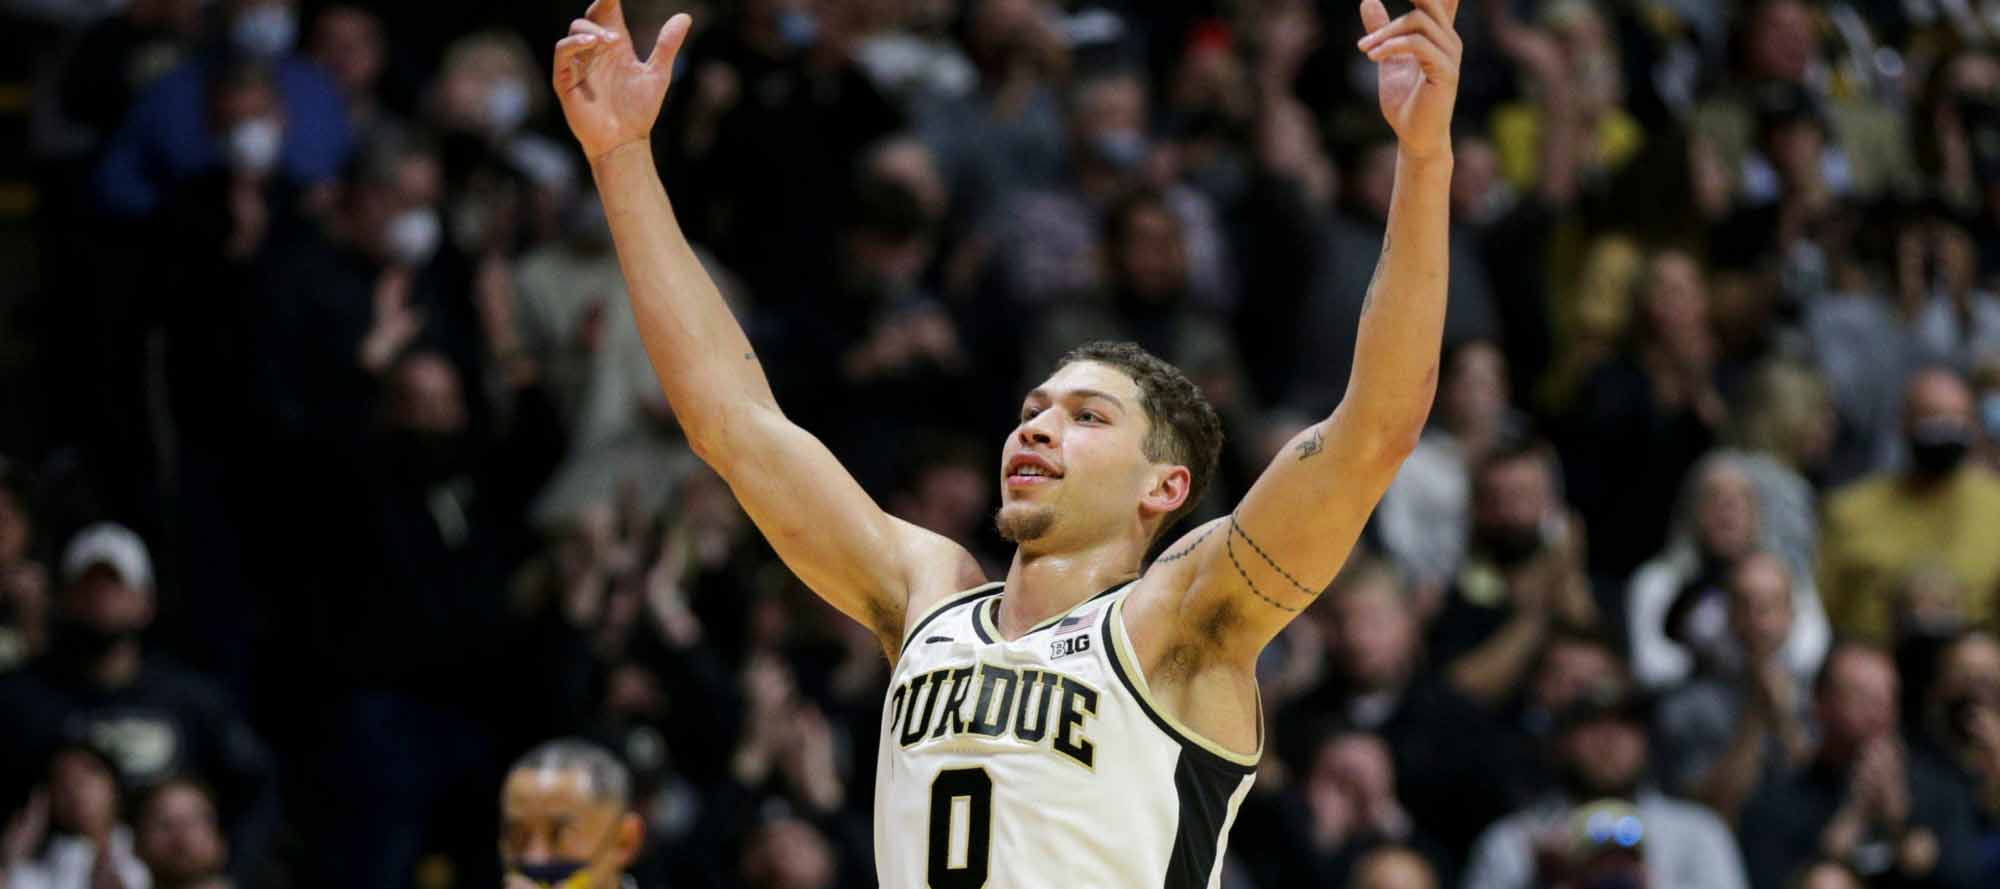 #13 Illinois vs #3 Purdue College Basketball Game Betting Preview